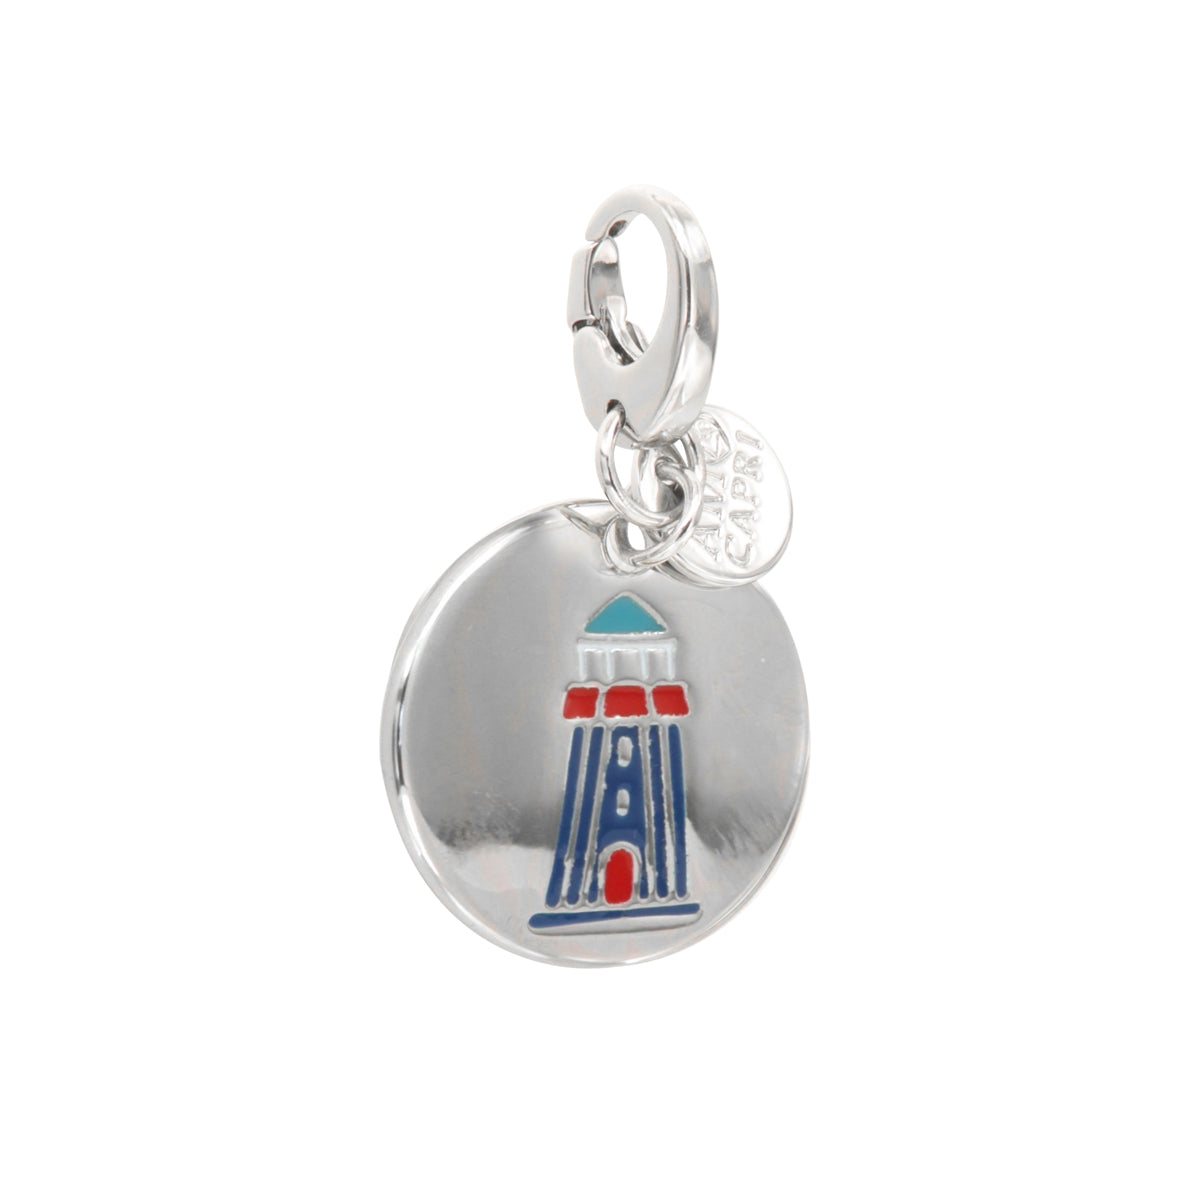 Metal pendant in medallion with lighthouse symbol, with colored glazes